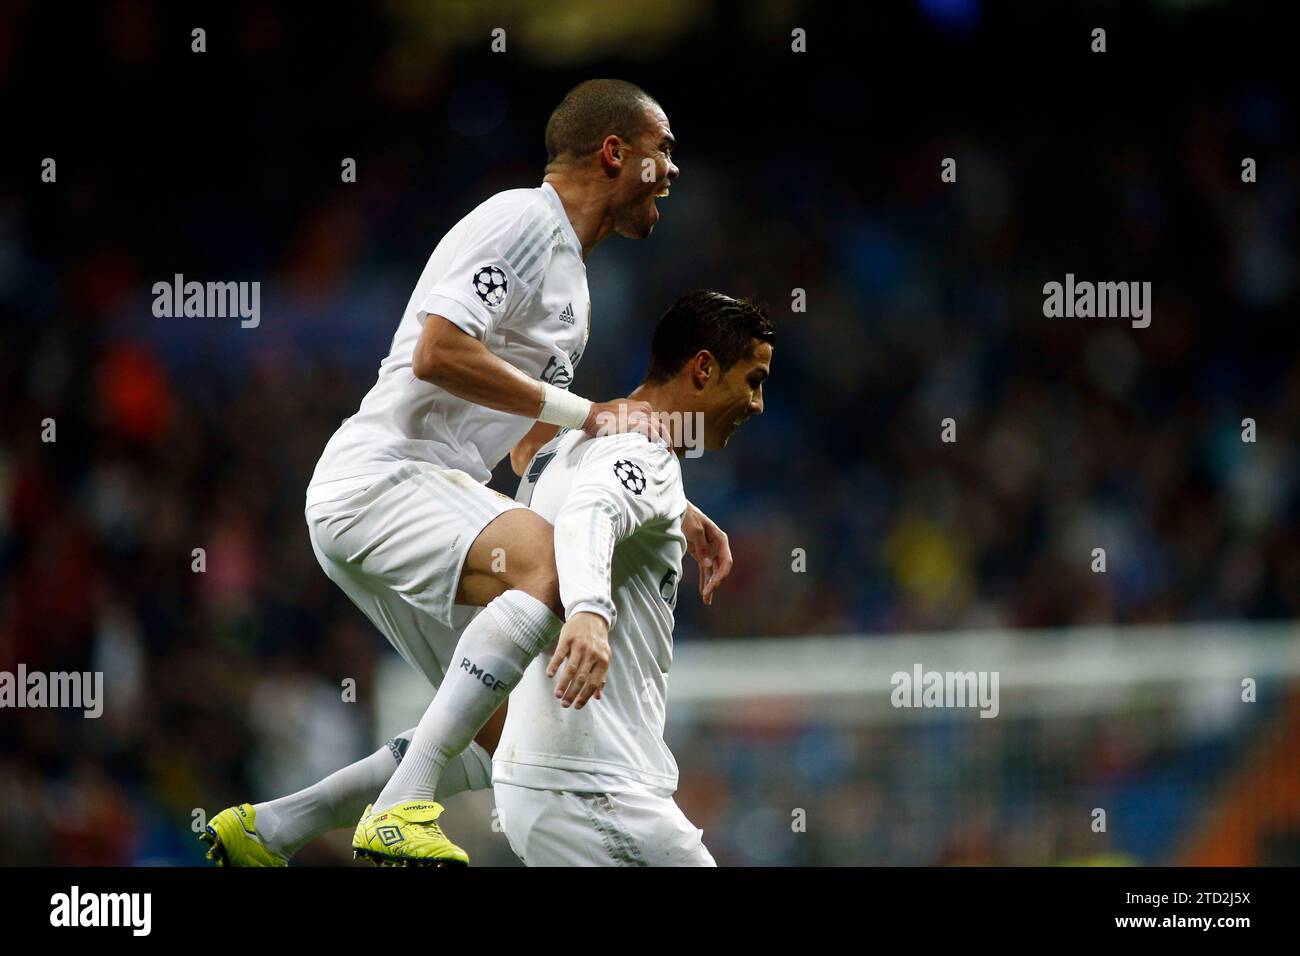 Madrid, 12/08/2015. Champions League match played at the Santiago Bernabéu stadium, between Real Madrid and Malmö. In the image, Cristiano Ronaldo scores and celebrates a goal. Photo: Oscar del Pozo ARCHDC. Credit: Album / Archivo ABC / Oscar del Pozo Stock Photo